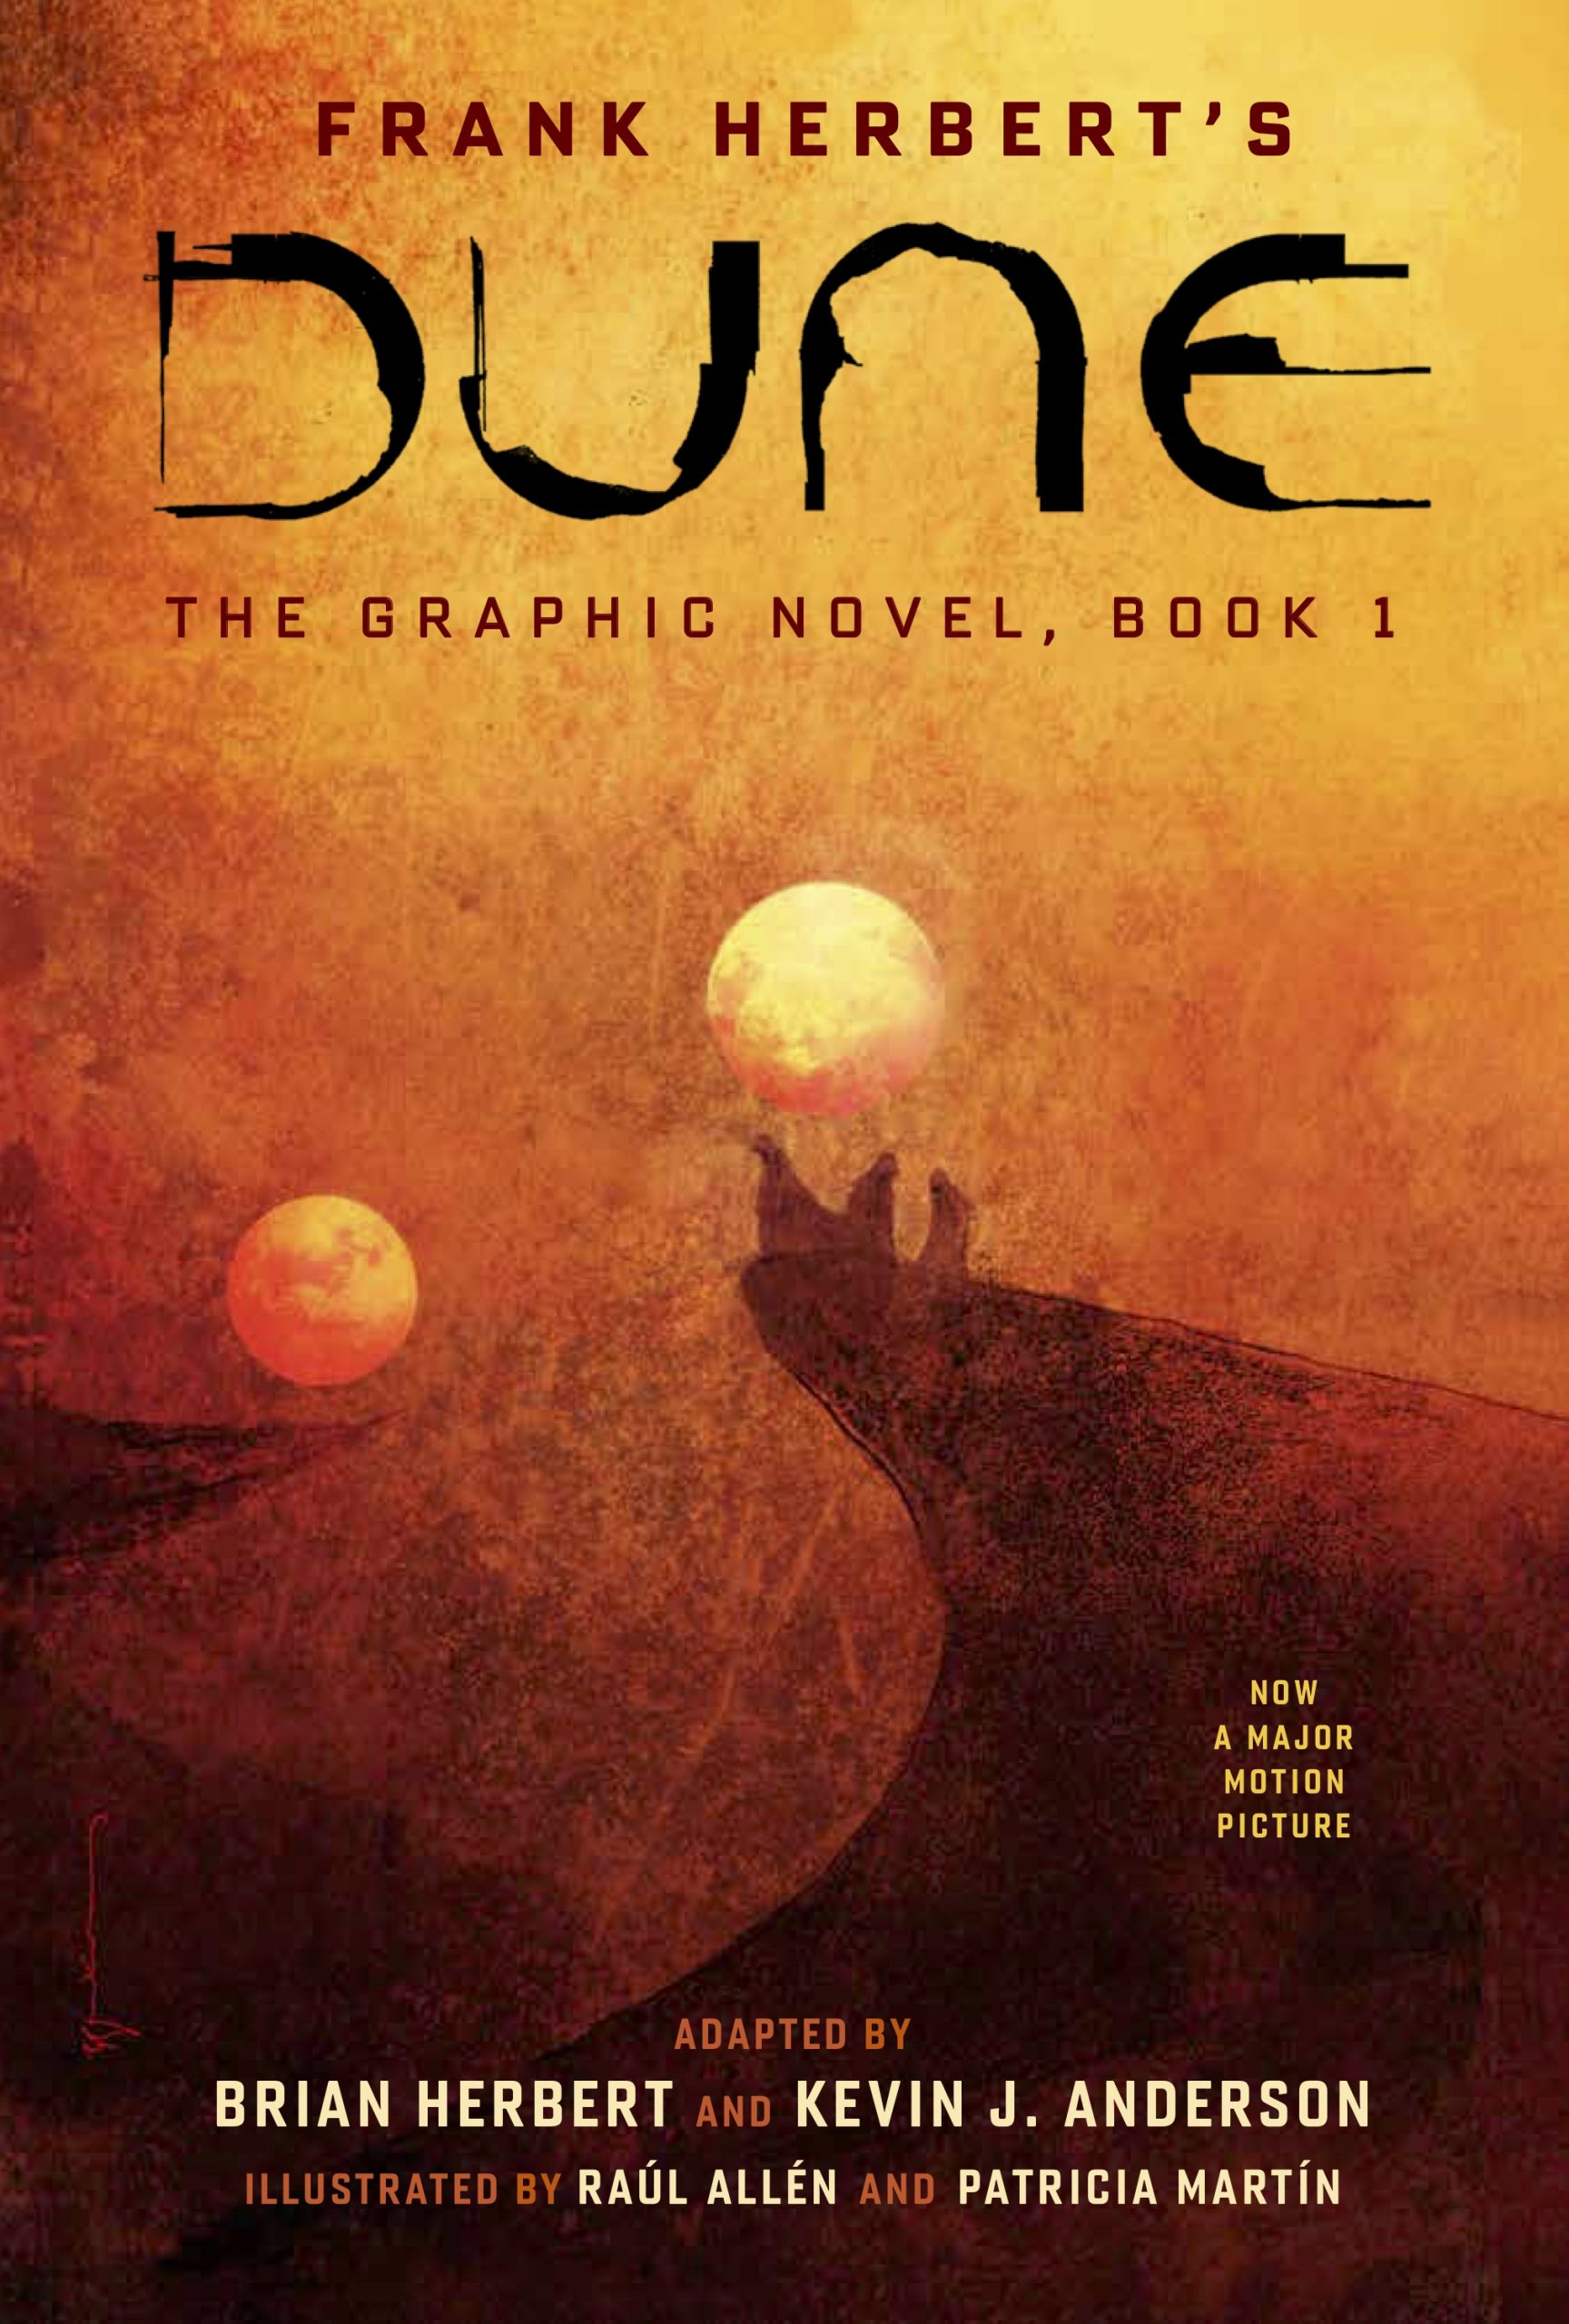 Abrams-Dune-GN-cover